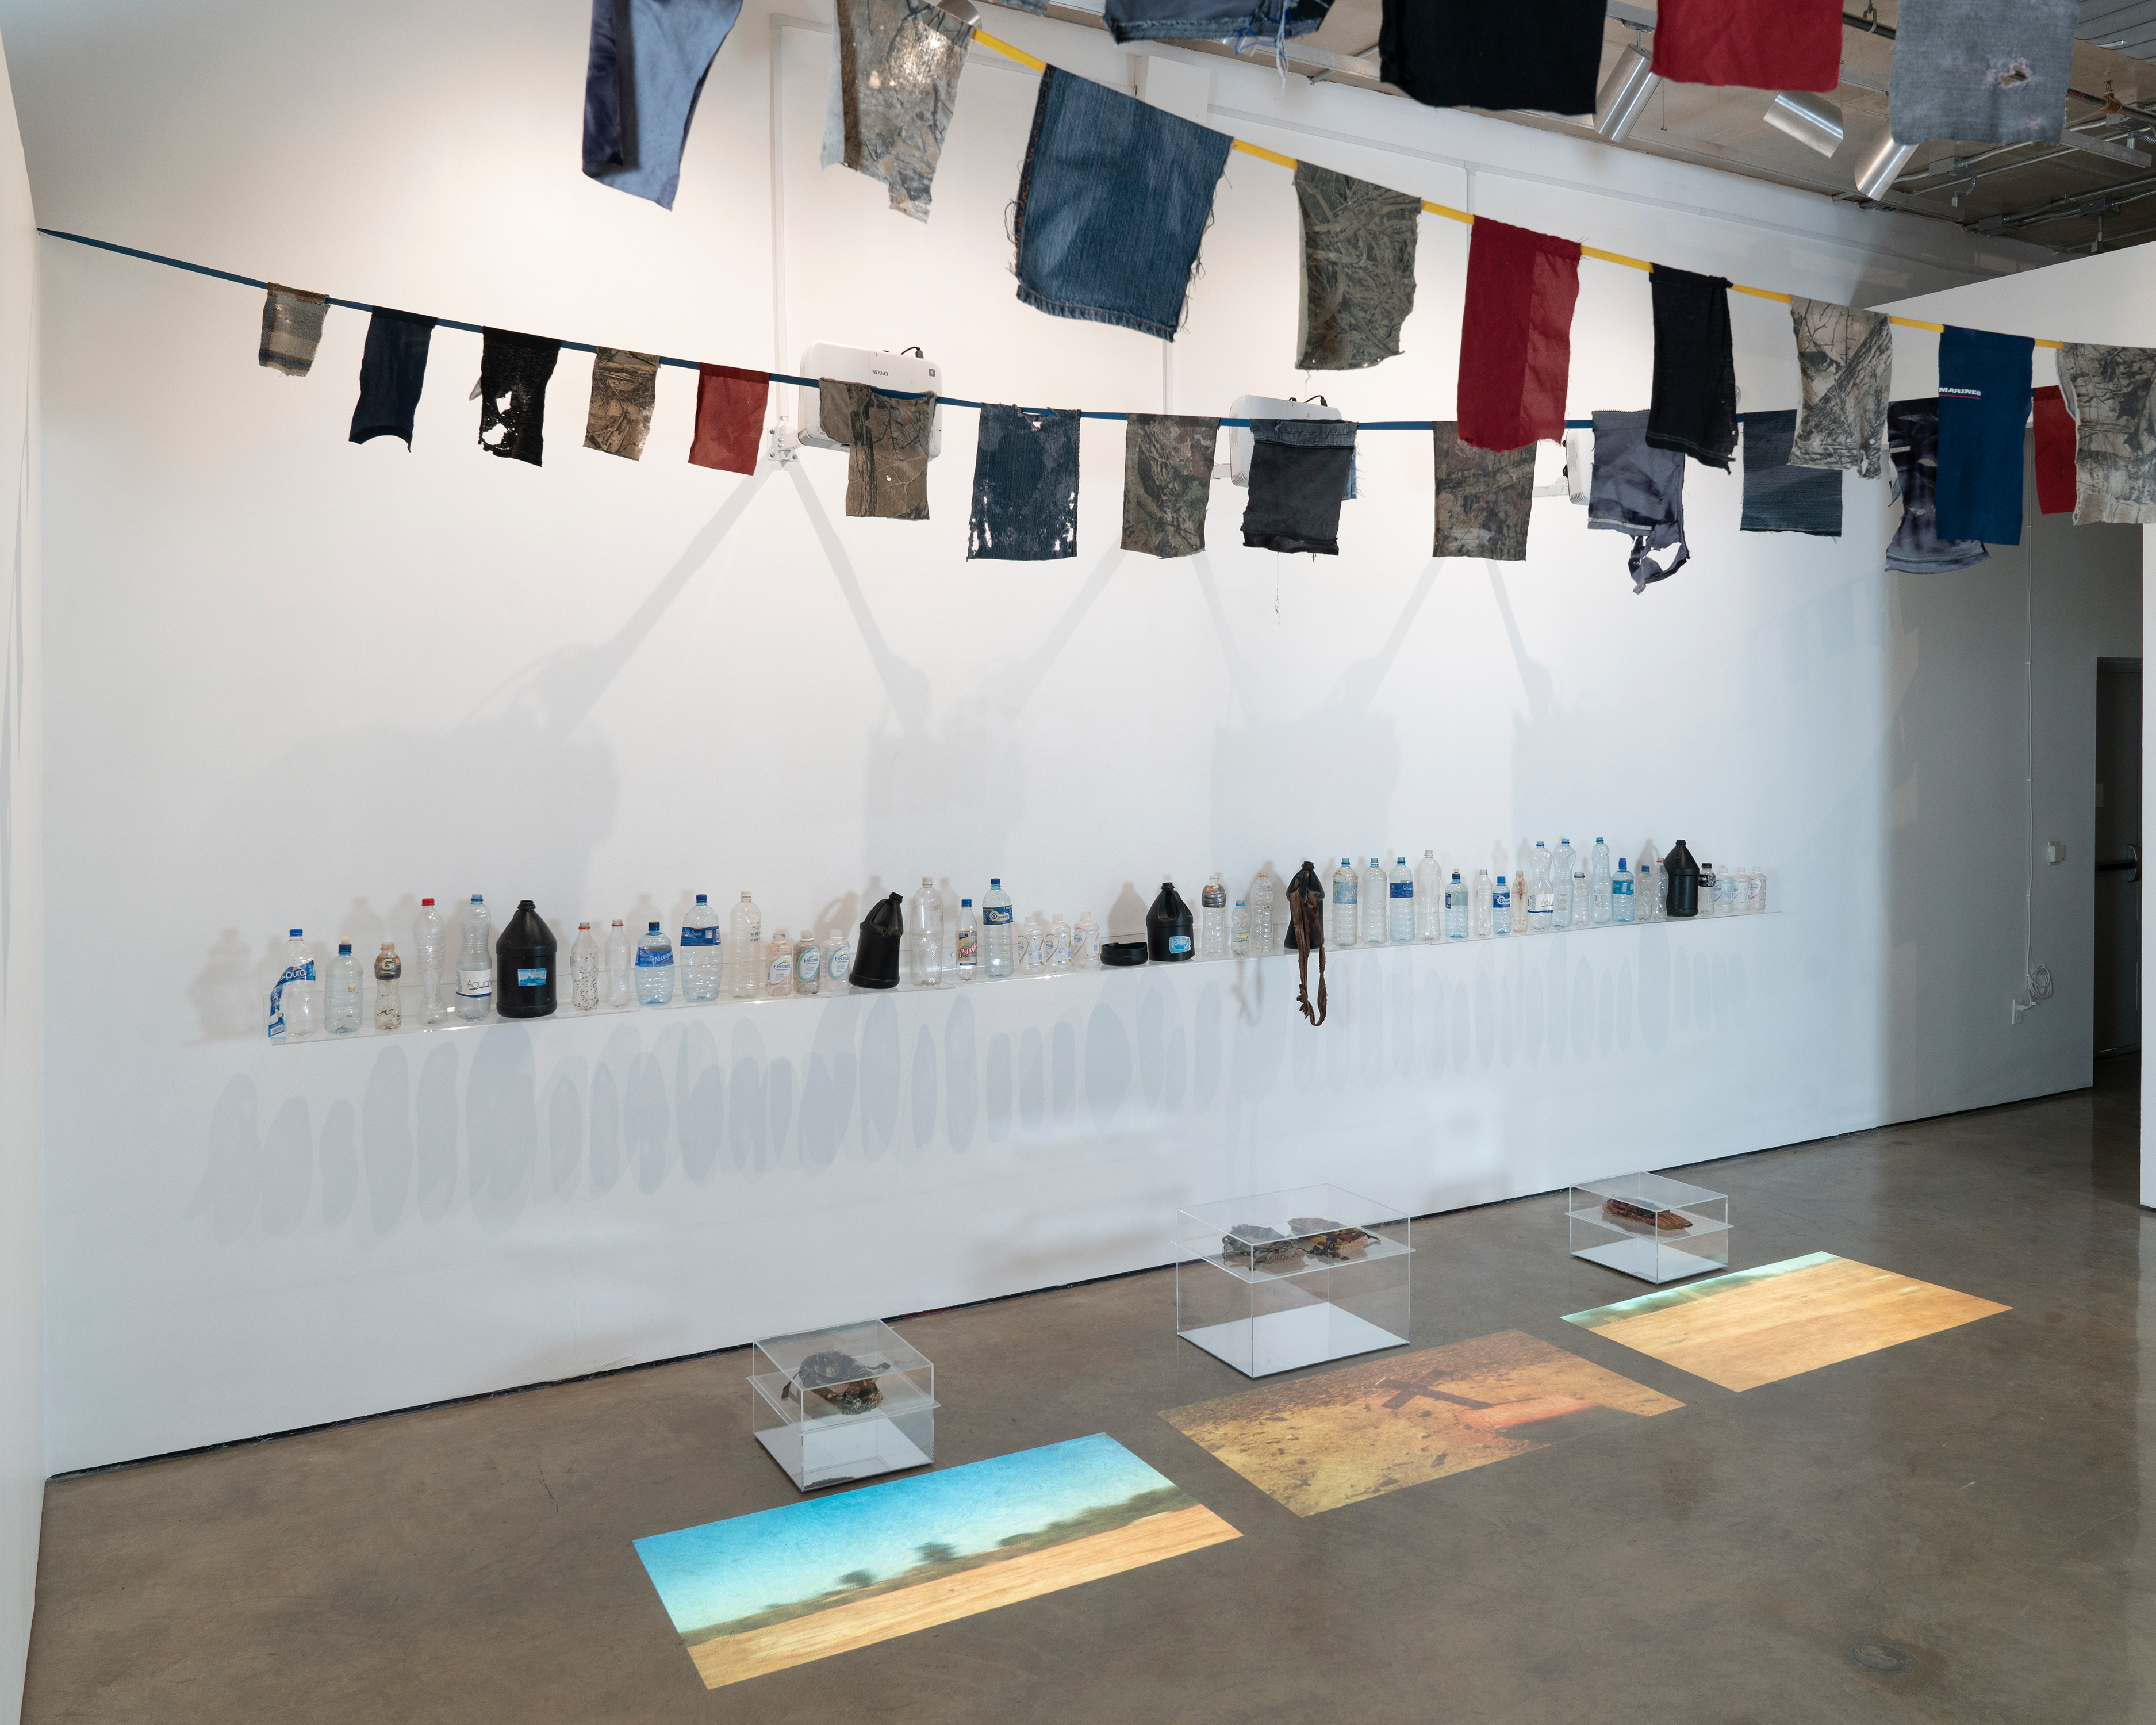 Anne Wallace, Untitled, 2019, Documentary videos; water bottles, clothing and carpet shoes found along migrant trails in the Sonoran desert, Dimensions variable